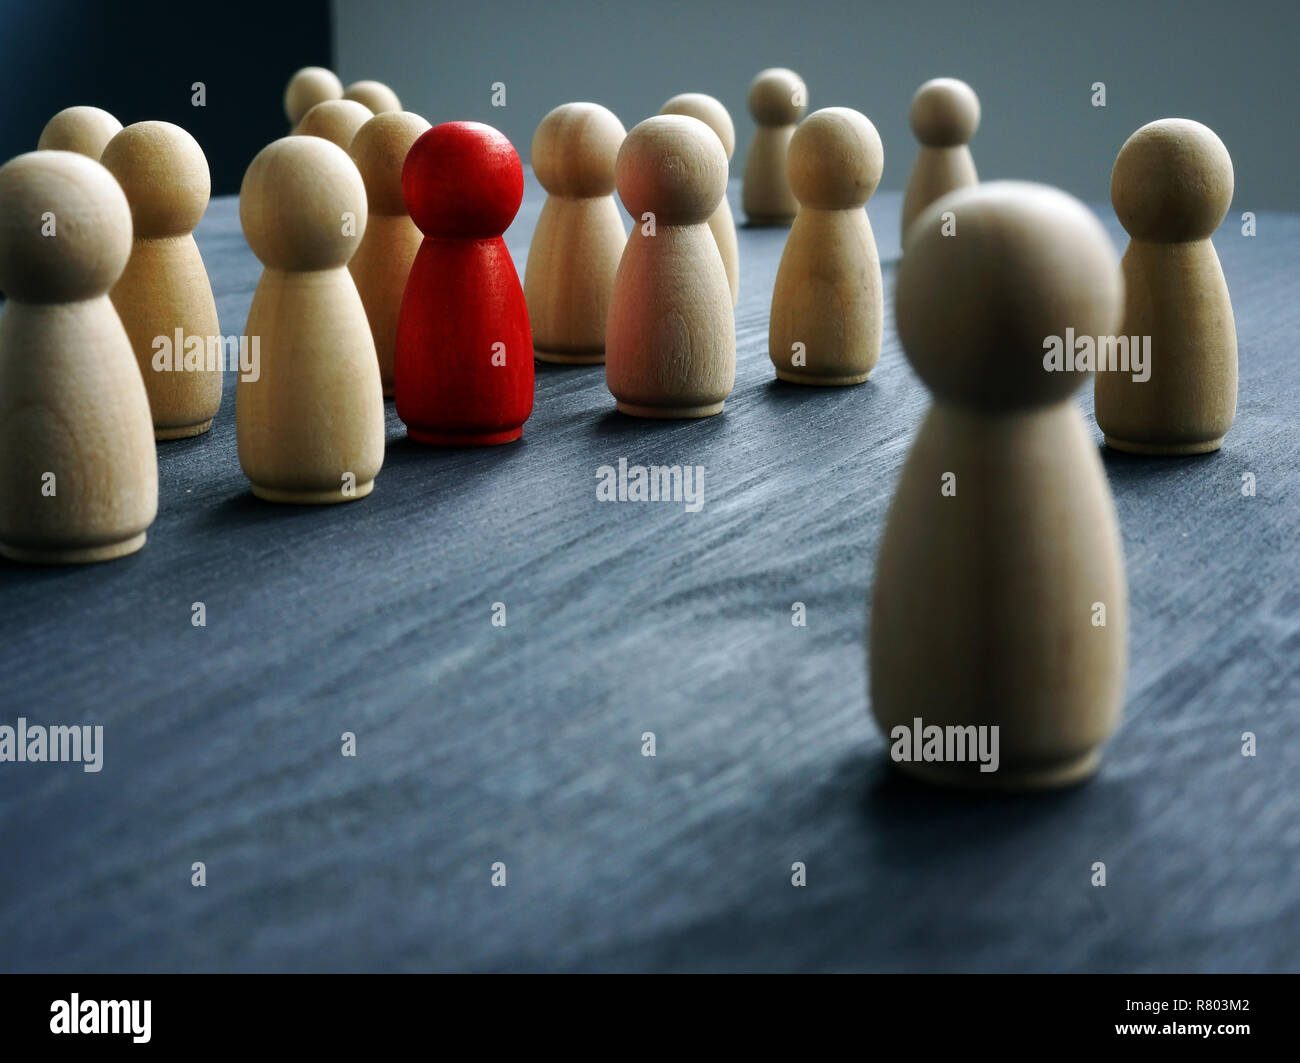 Be Unique, think differently, individuality. Wooden figures and one red figure. Stock Photo